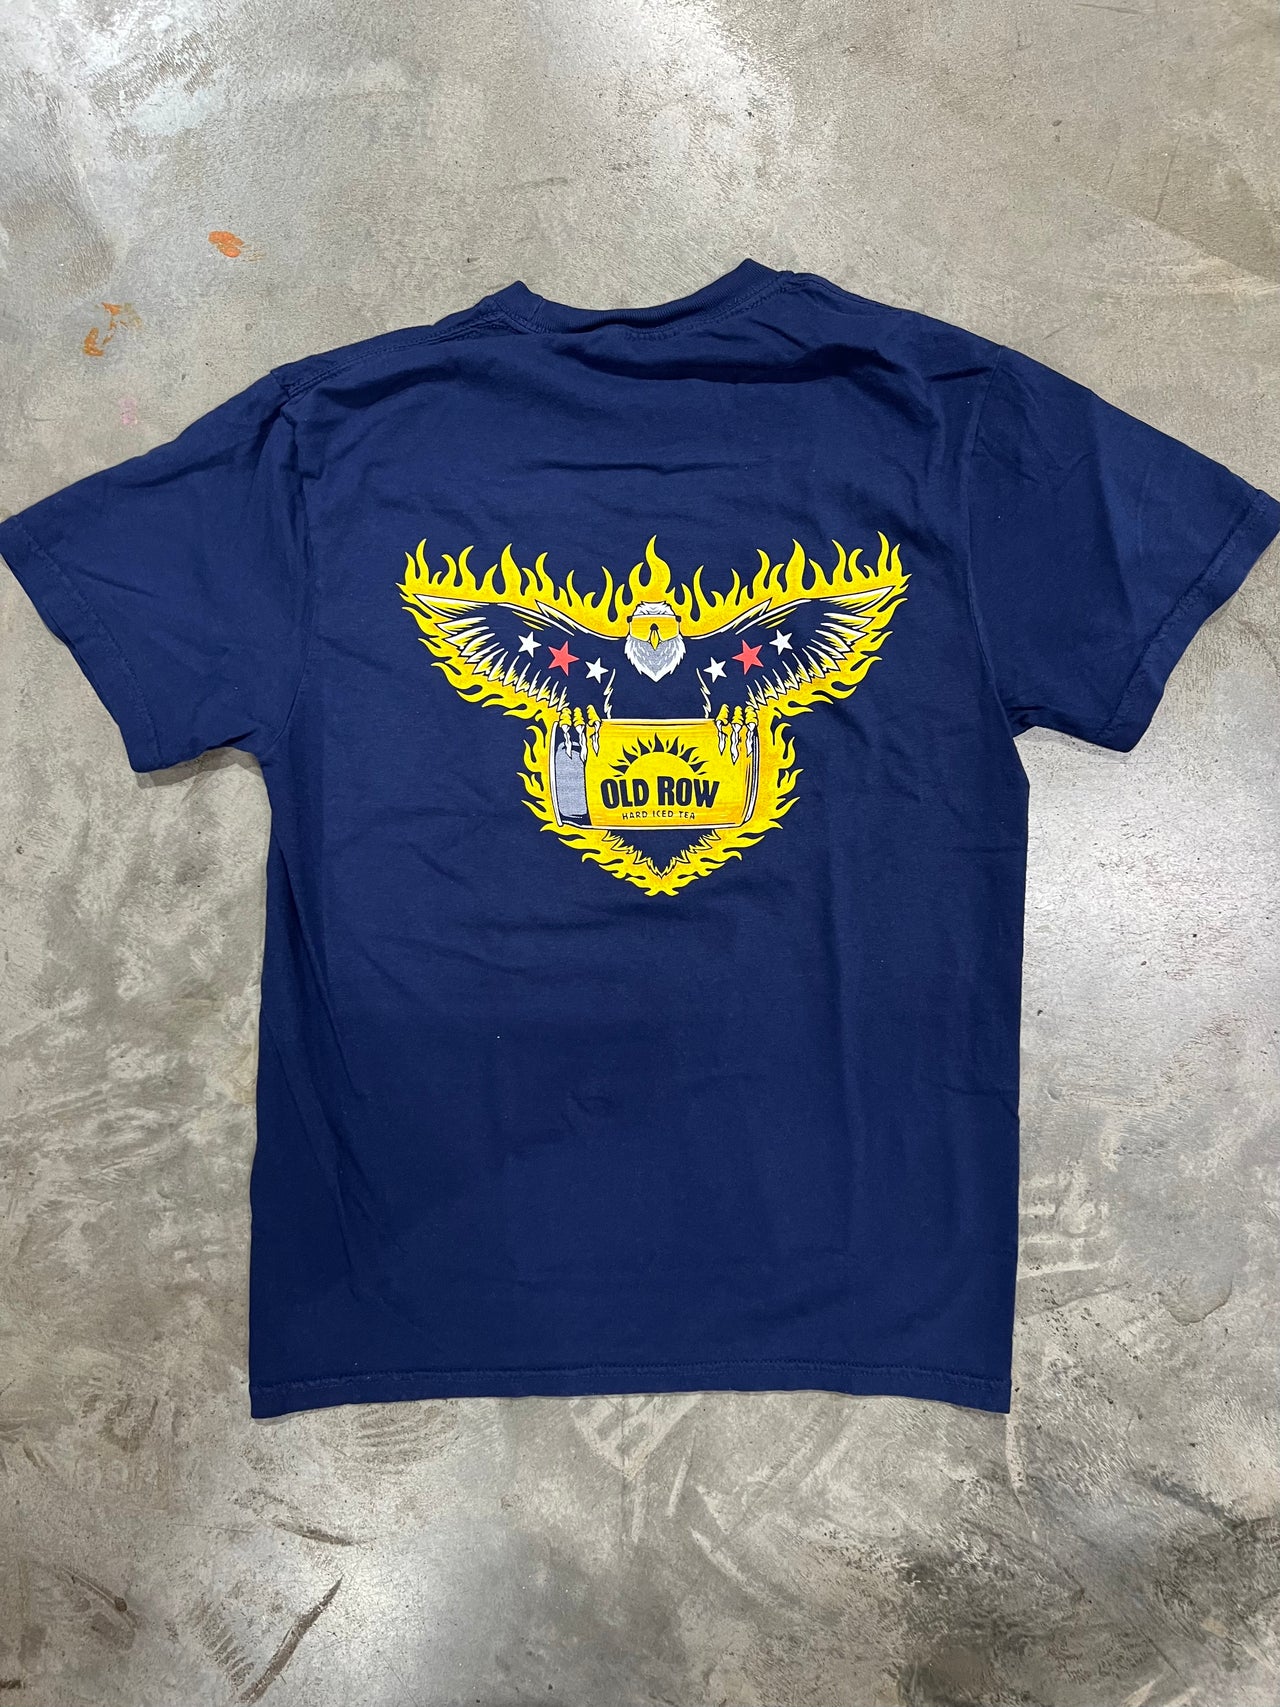 American Eagle with a Twisted Tea on fire on a short sleeve shirt.